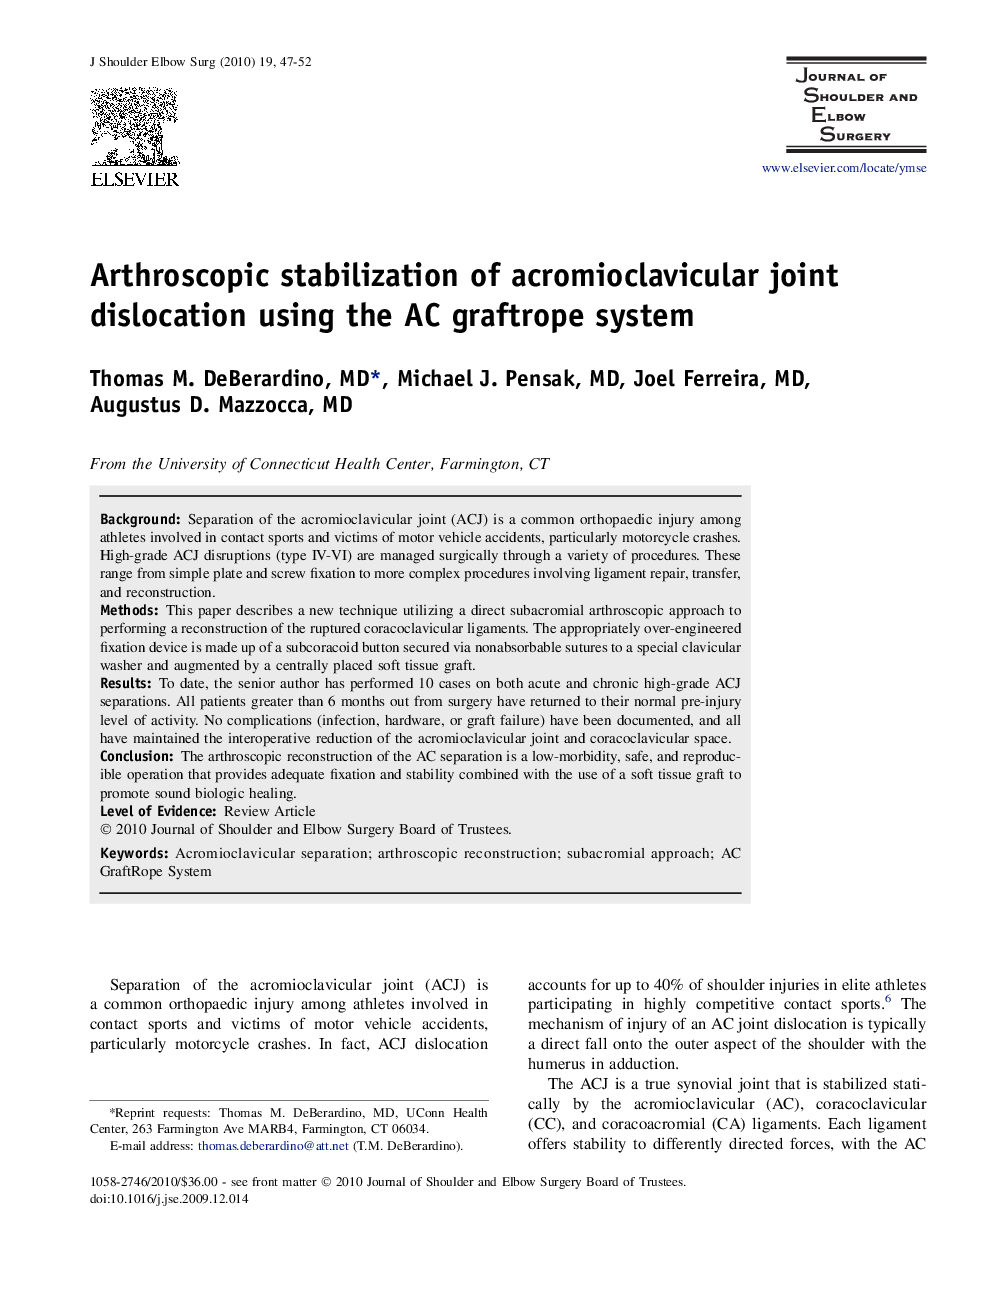 Arthroscopic stabilization of acromioclavicular joint dislocation using the AC graftrope system